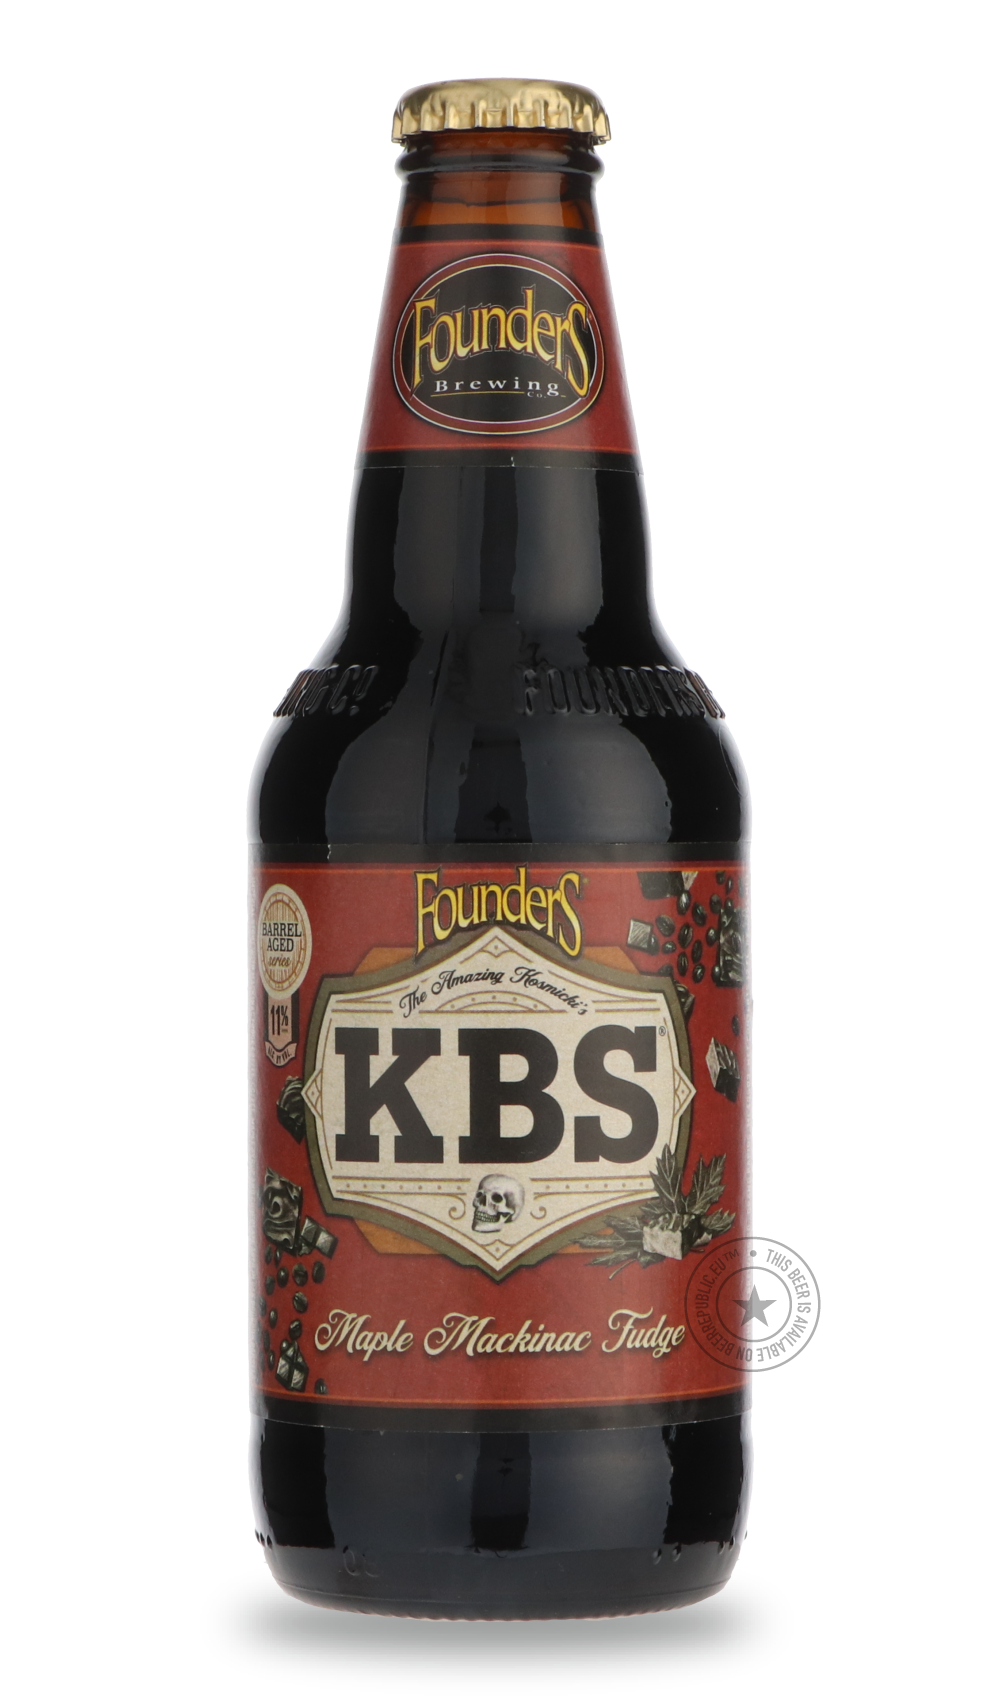 -Founders- KBS Maple Mackinac Fudge-Stout & Porter- Only @ Beer Republic - The best online beer store for American & Canadian craft beer - Buy beer online from the USA and Canada - Bier online kopen - Amerikaans bier kopen - Craft beer store - Craft beer kopen - Amerikanisch bier kaufen - Bier online kaufen - Acheter biere online - IPA - Stout - Porter - New England IPA - Hazy IPA - Imperial Stout - Barrel Aged - Barrel Aged Imperial Stout - Brown - Dark beer - Blond - Blonde - Pilsner - Lager - Wheat - Wei